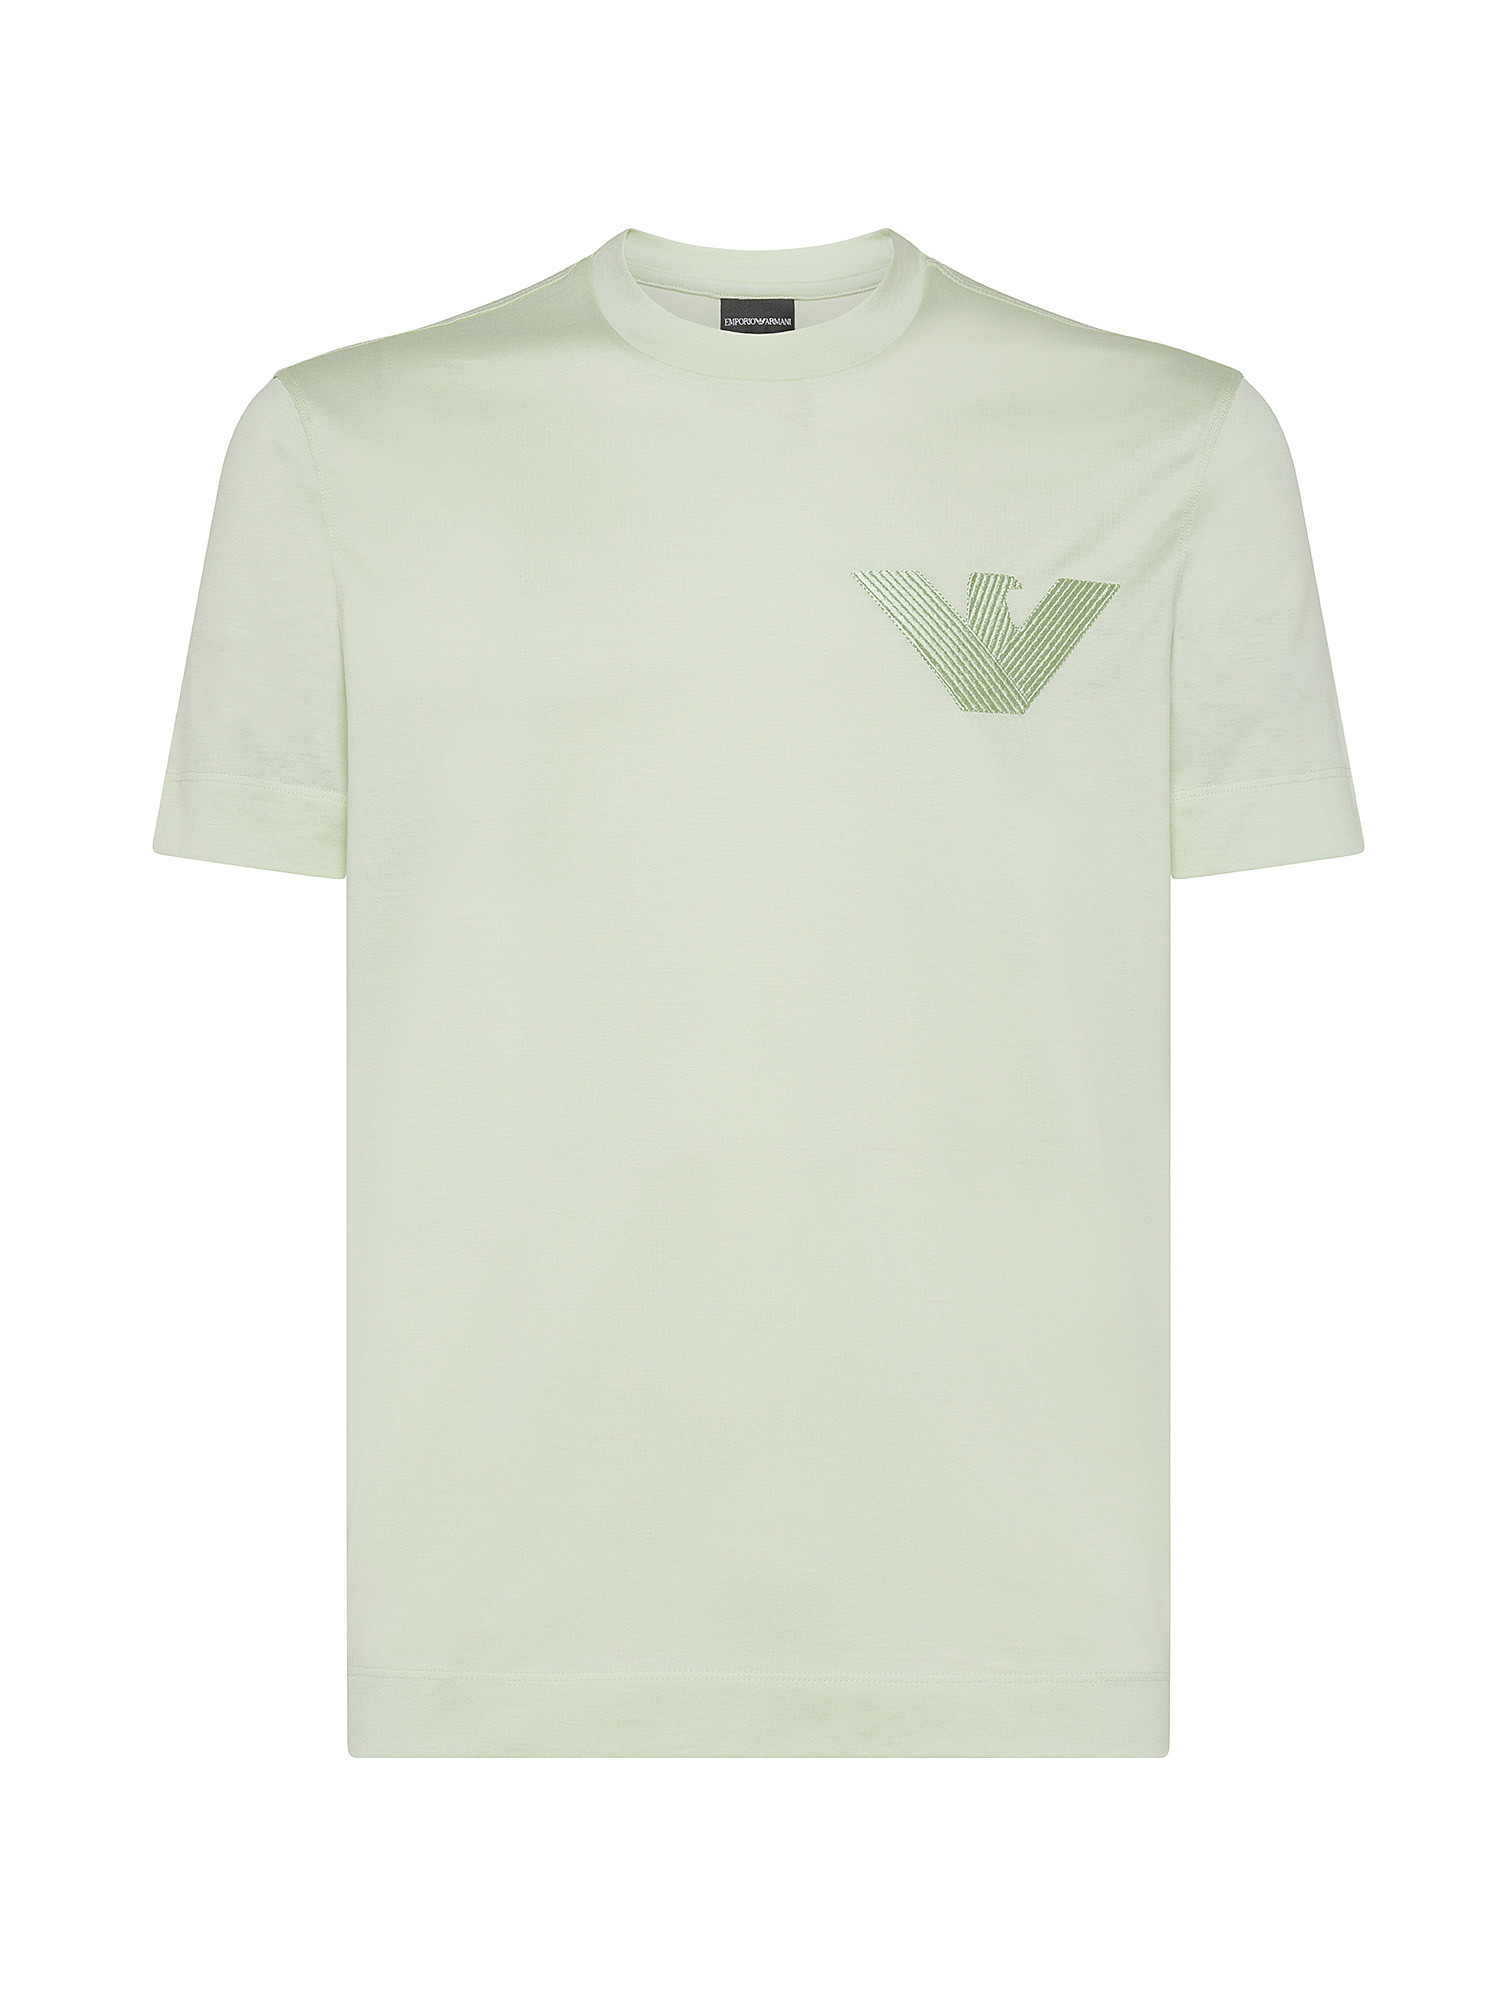 Emporio Armani - T-shirt in cotone con logo, Verde lime, large image number 0